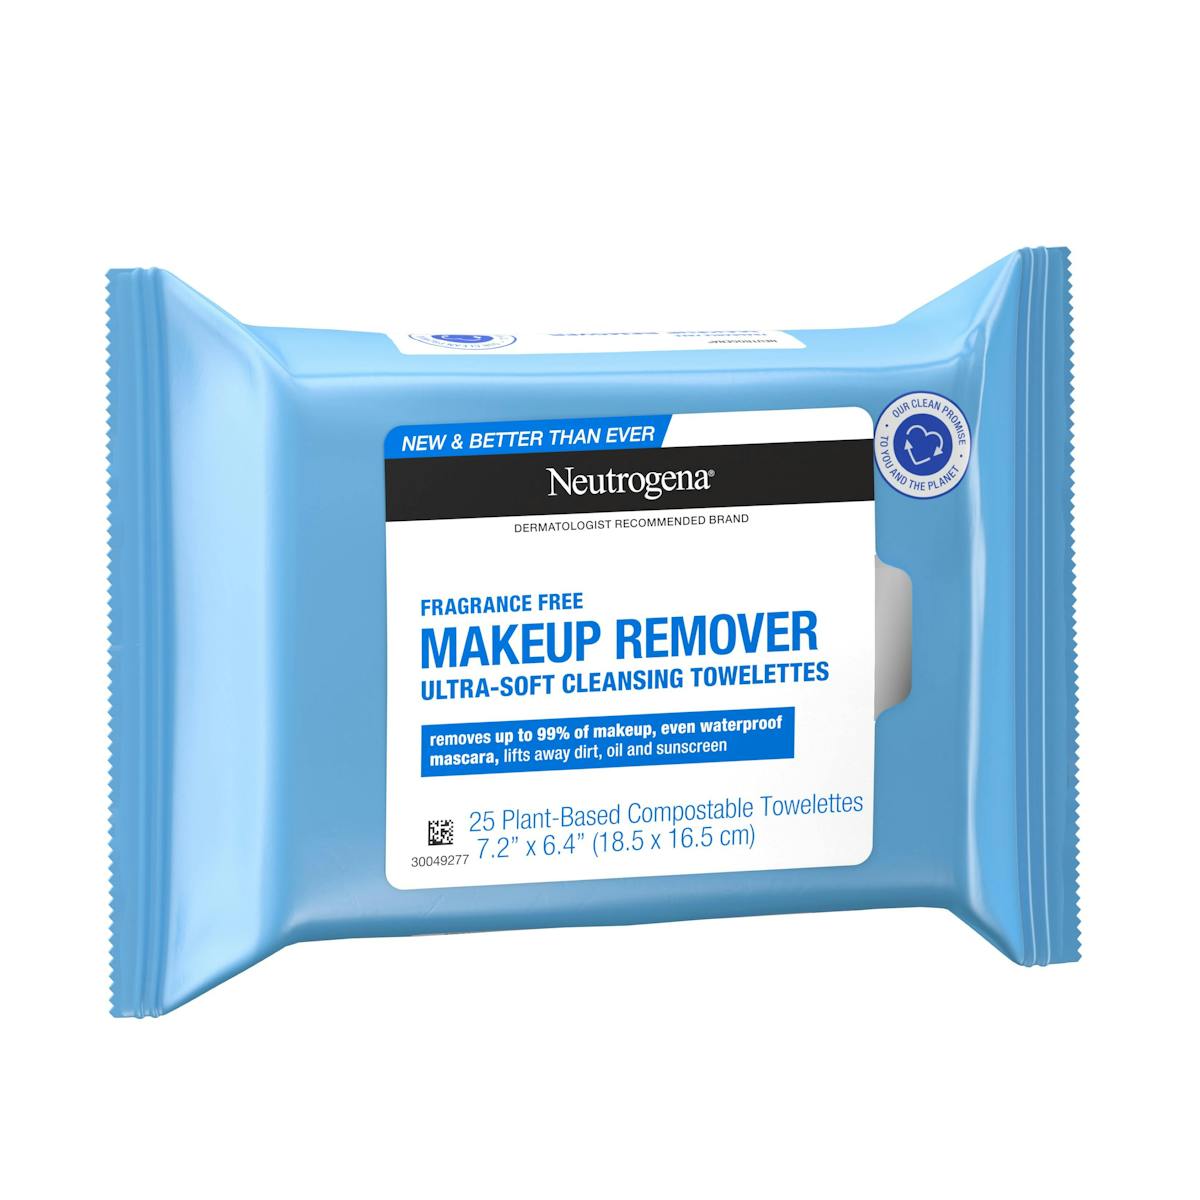  Bubble Skincare Wipe Out Makeup Remover, Gentle yet Effective  Makeup Removal, Chickweed Extract Rich in Vitamins and Antioxidants,  Fragrance-Free, 50ml : Beauty & Personal Care